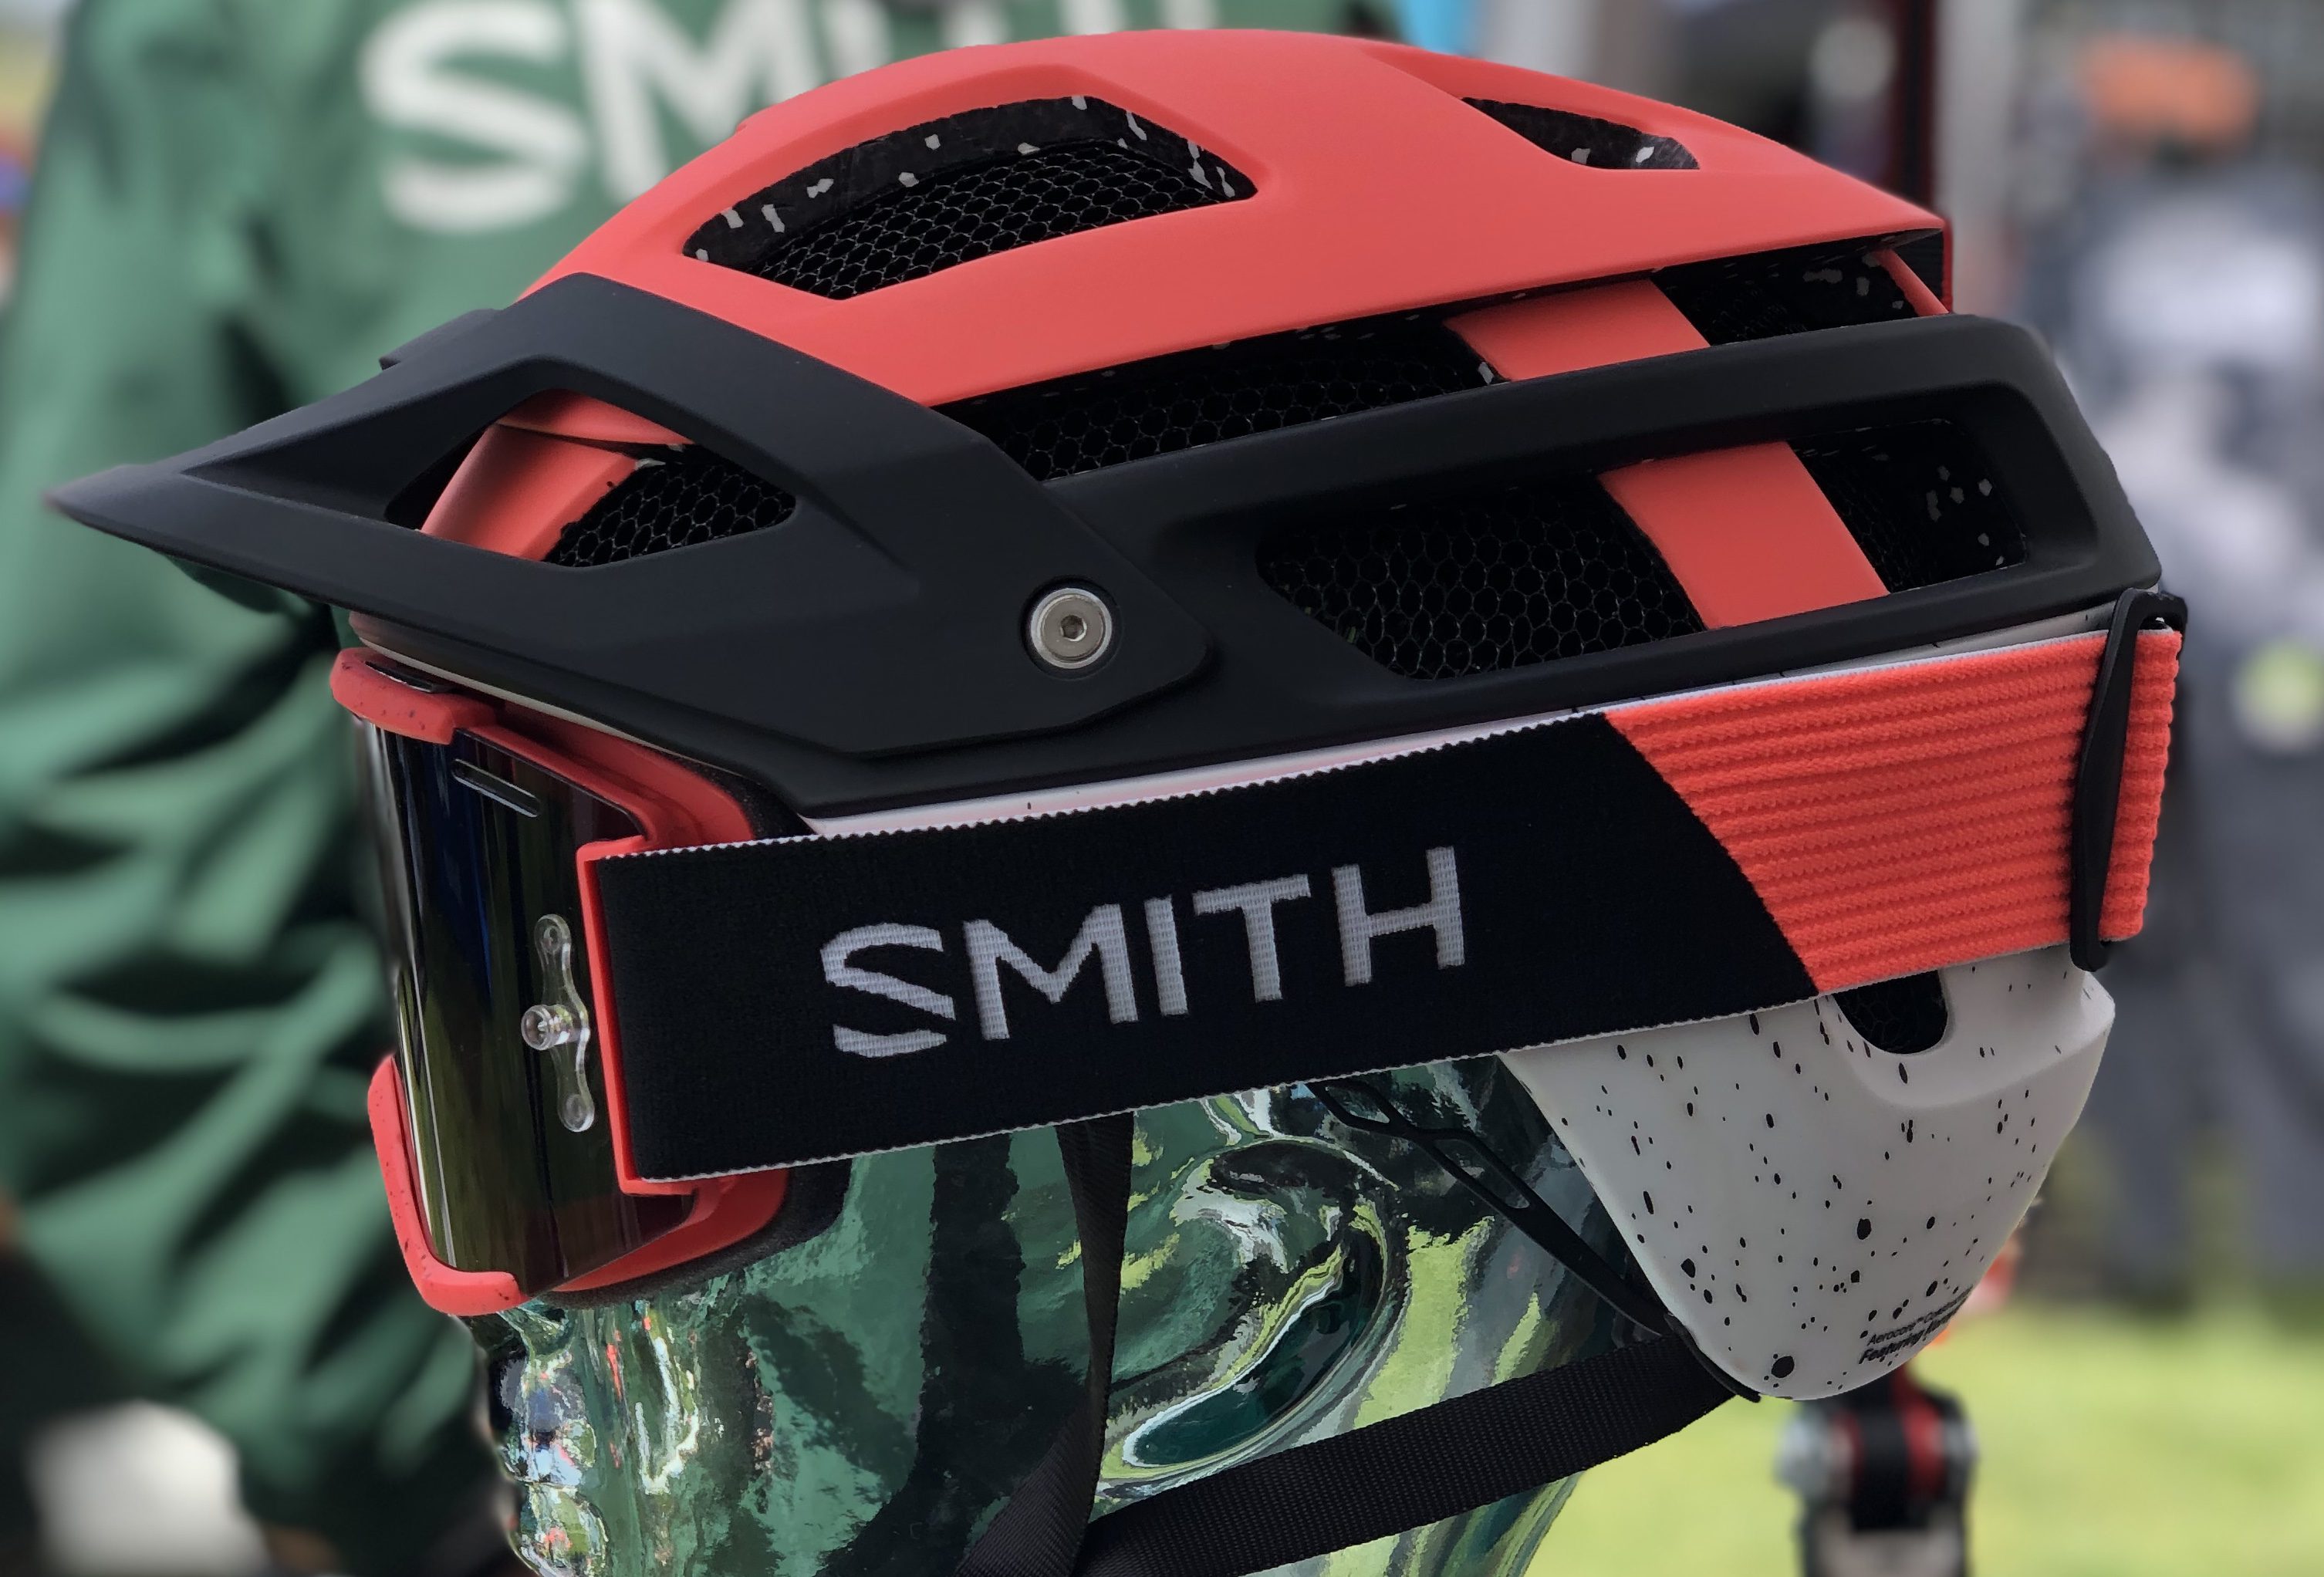 Smith Mount Kit For Camera and Light For Forefront 2 and Forefront Helmets 